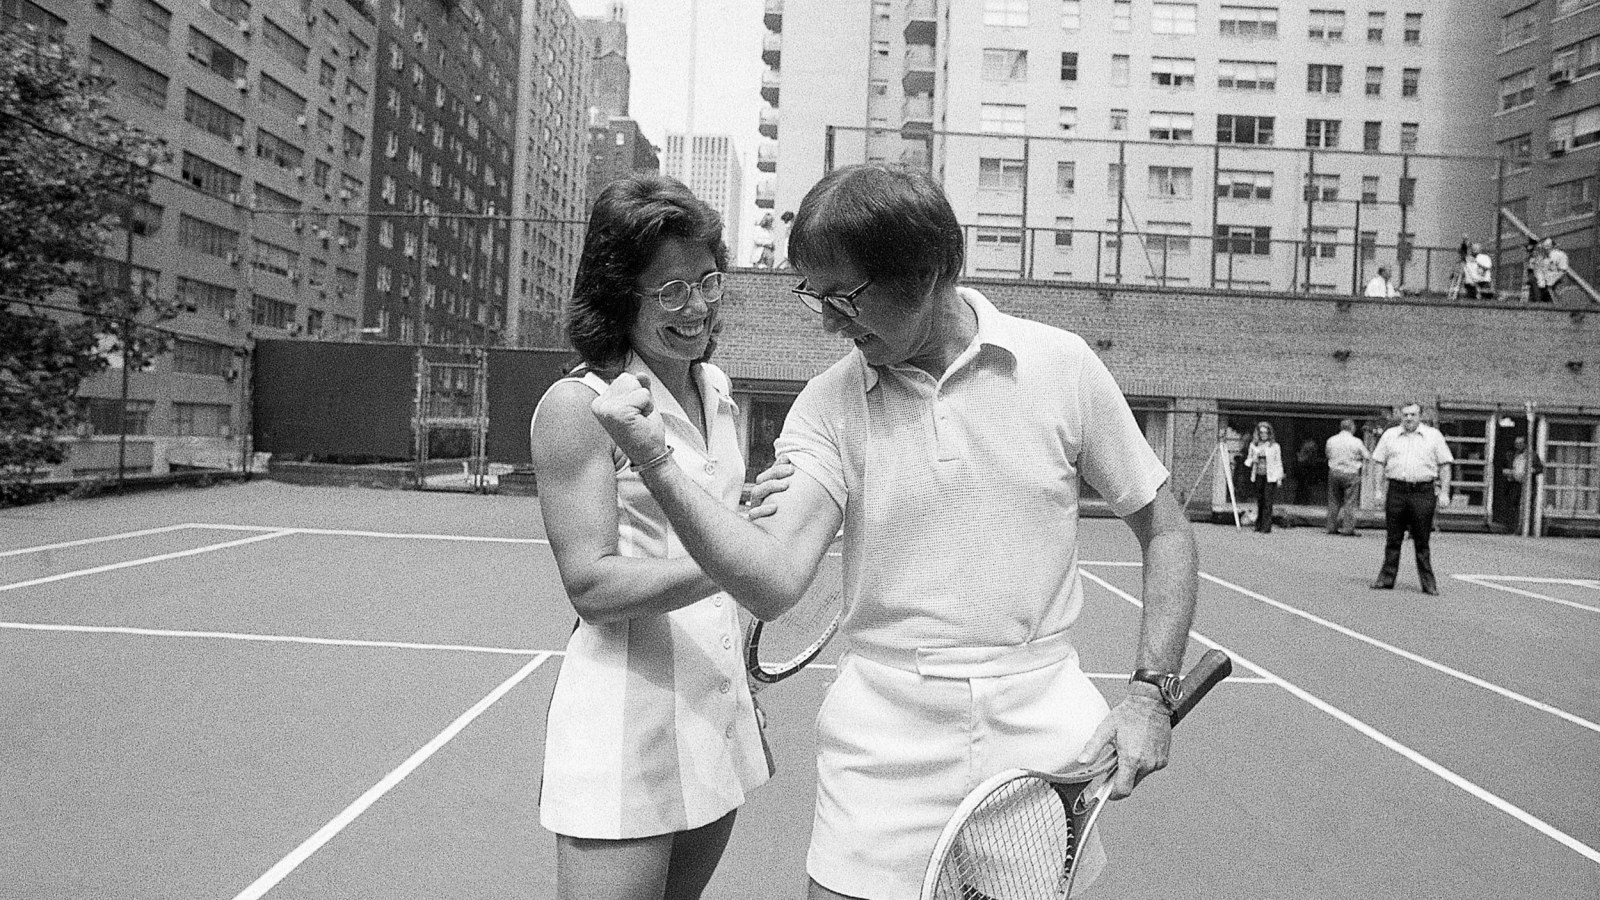 The Battle of the Sexes: Who won, why did it happen and everything you have  to know about Billie Jean King's legendary match against Bobby Riggs